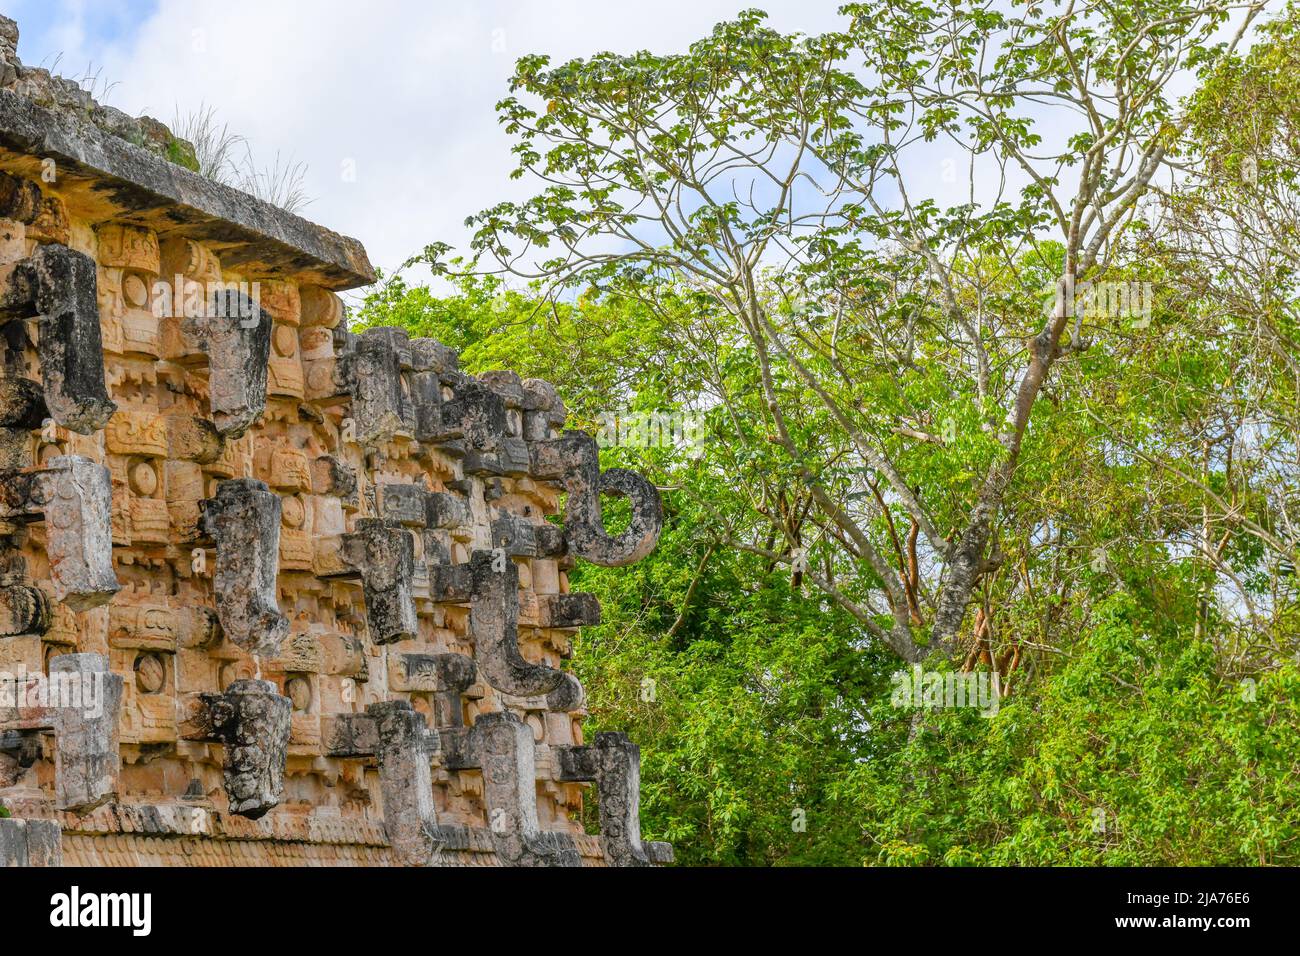 The Mayan ruins of Kabah surrounded by the jungle, Yucatan Mexico Stock Photo